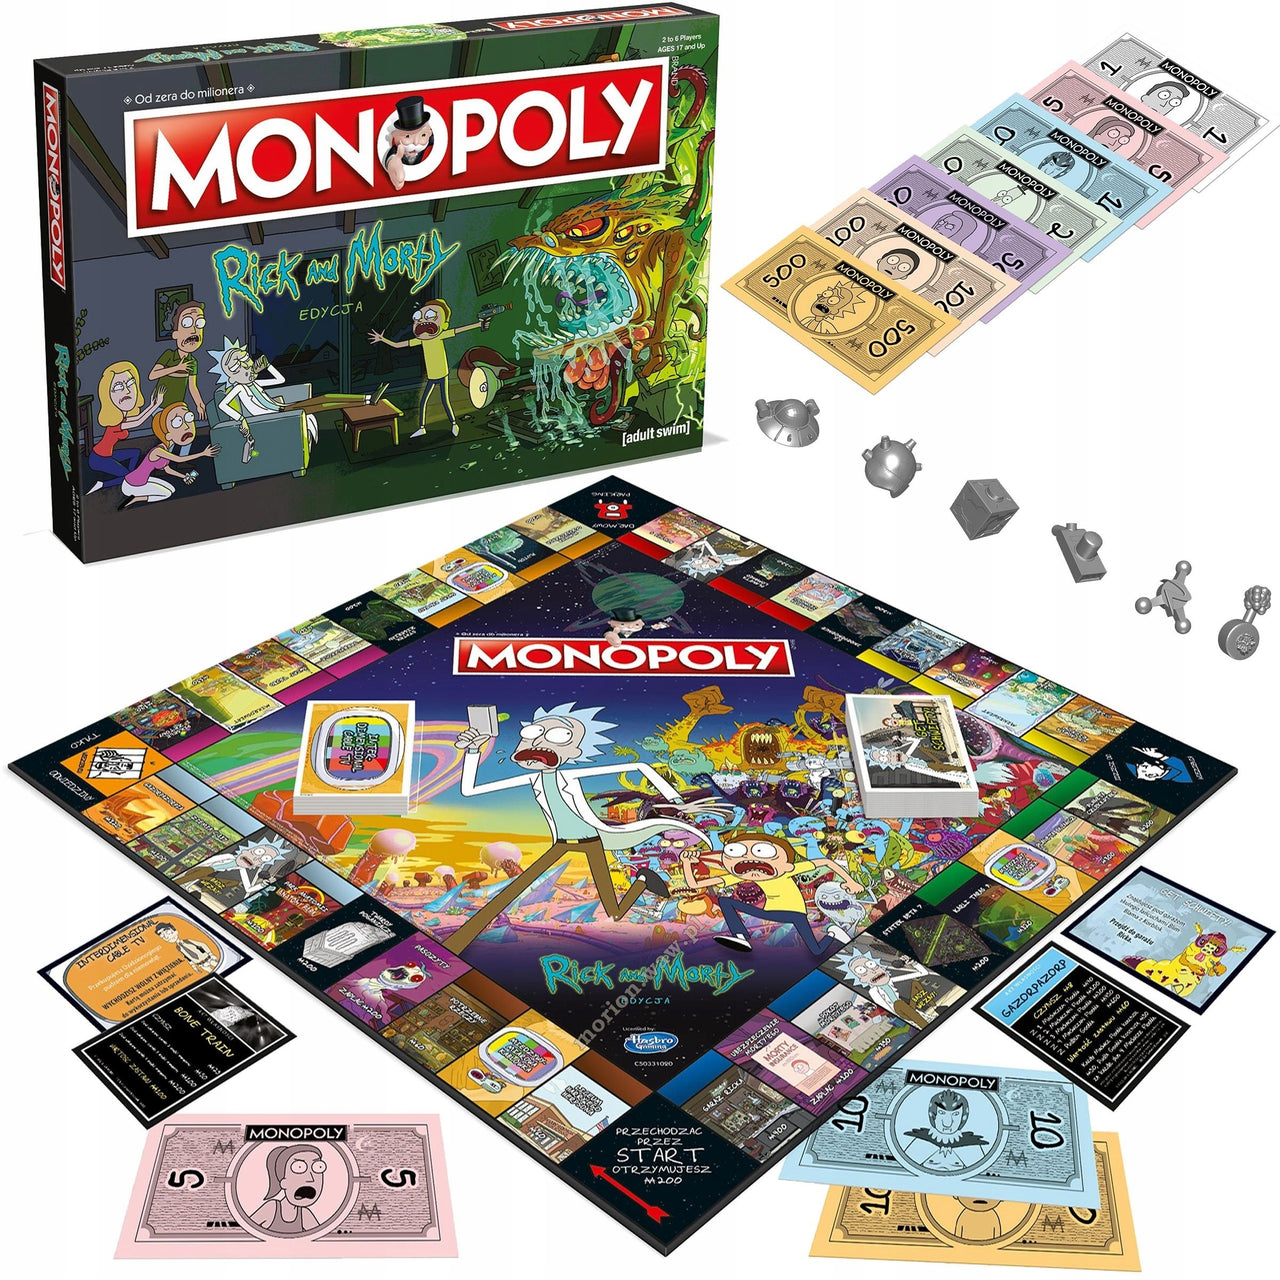 Ricky and Morty Monopoly